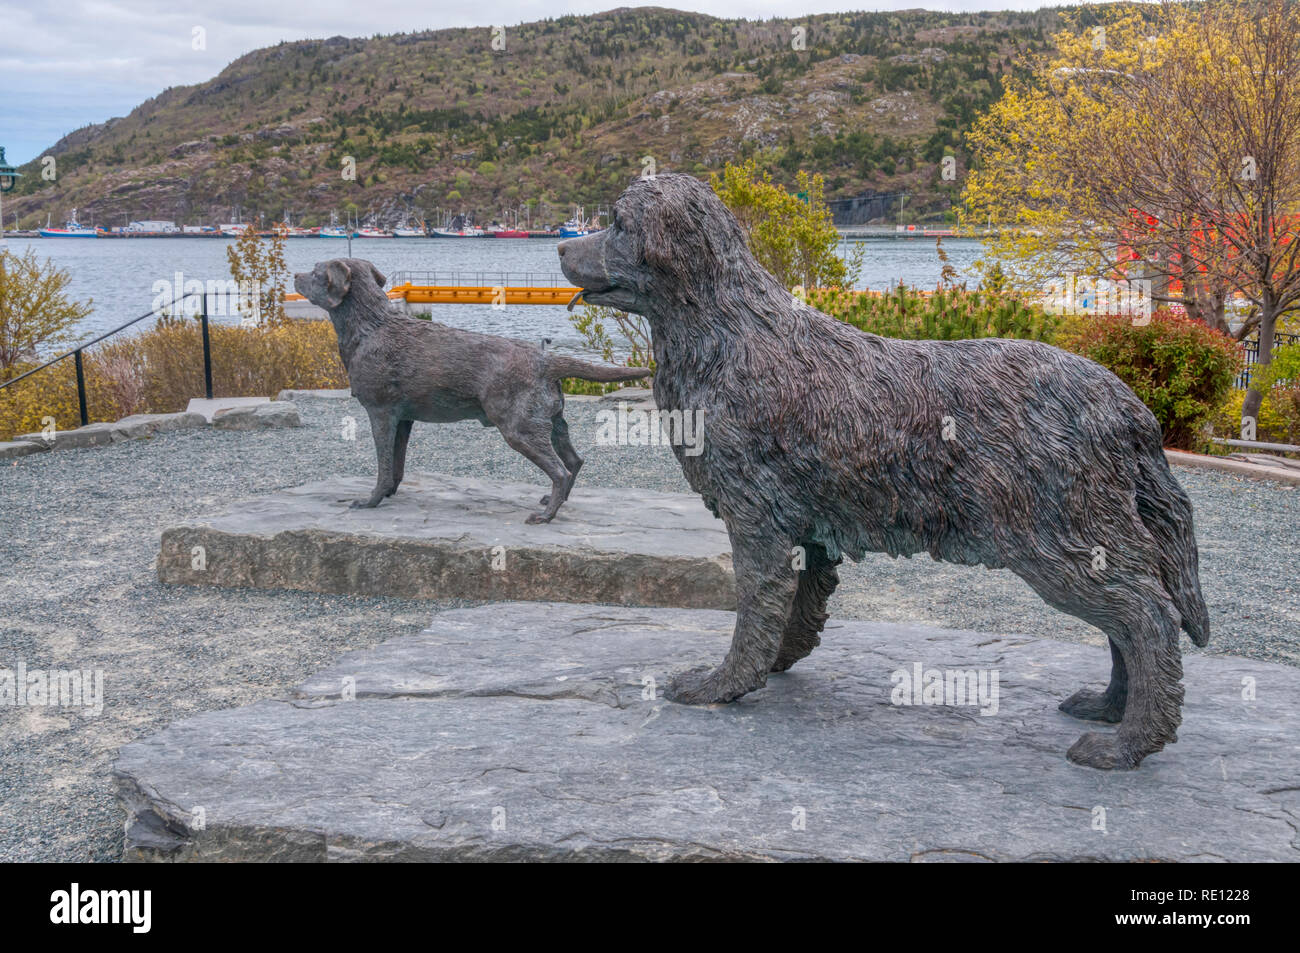 Statues of Newfoundland and Labrador dogs by Luben Boykov in Harbourside Park on the waterfront at St John's, Newfoundland. Stock Photo